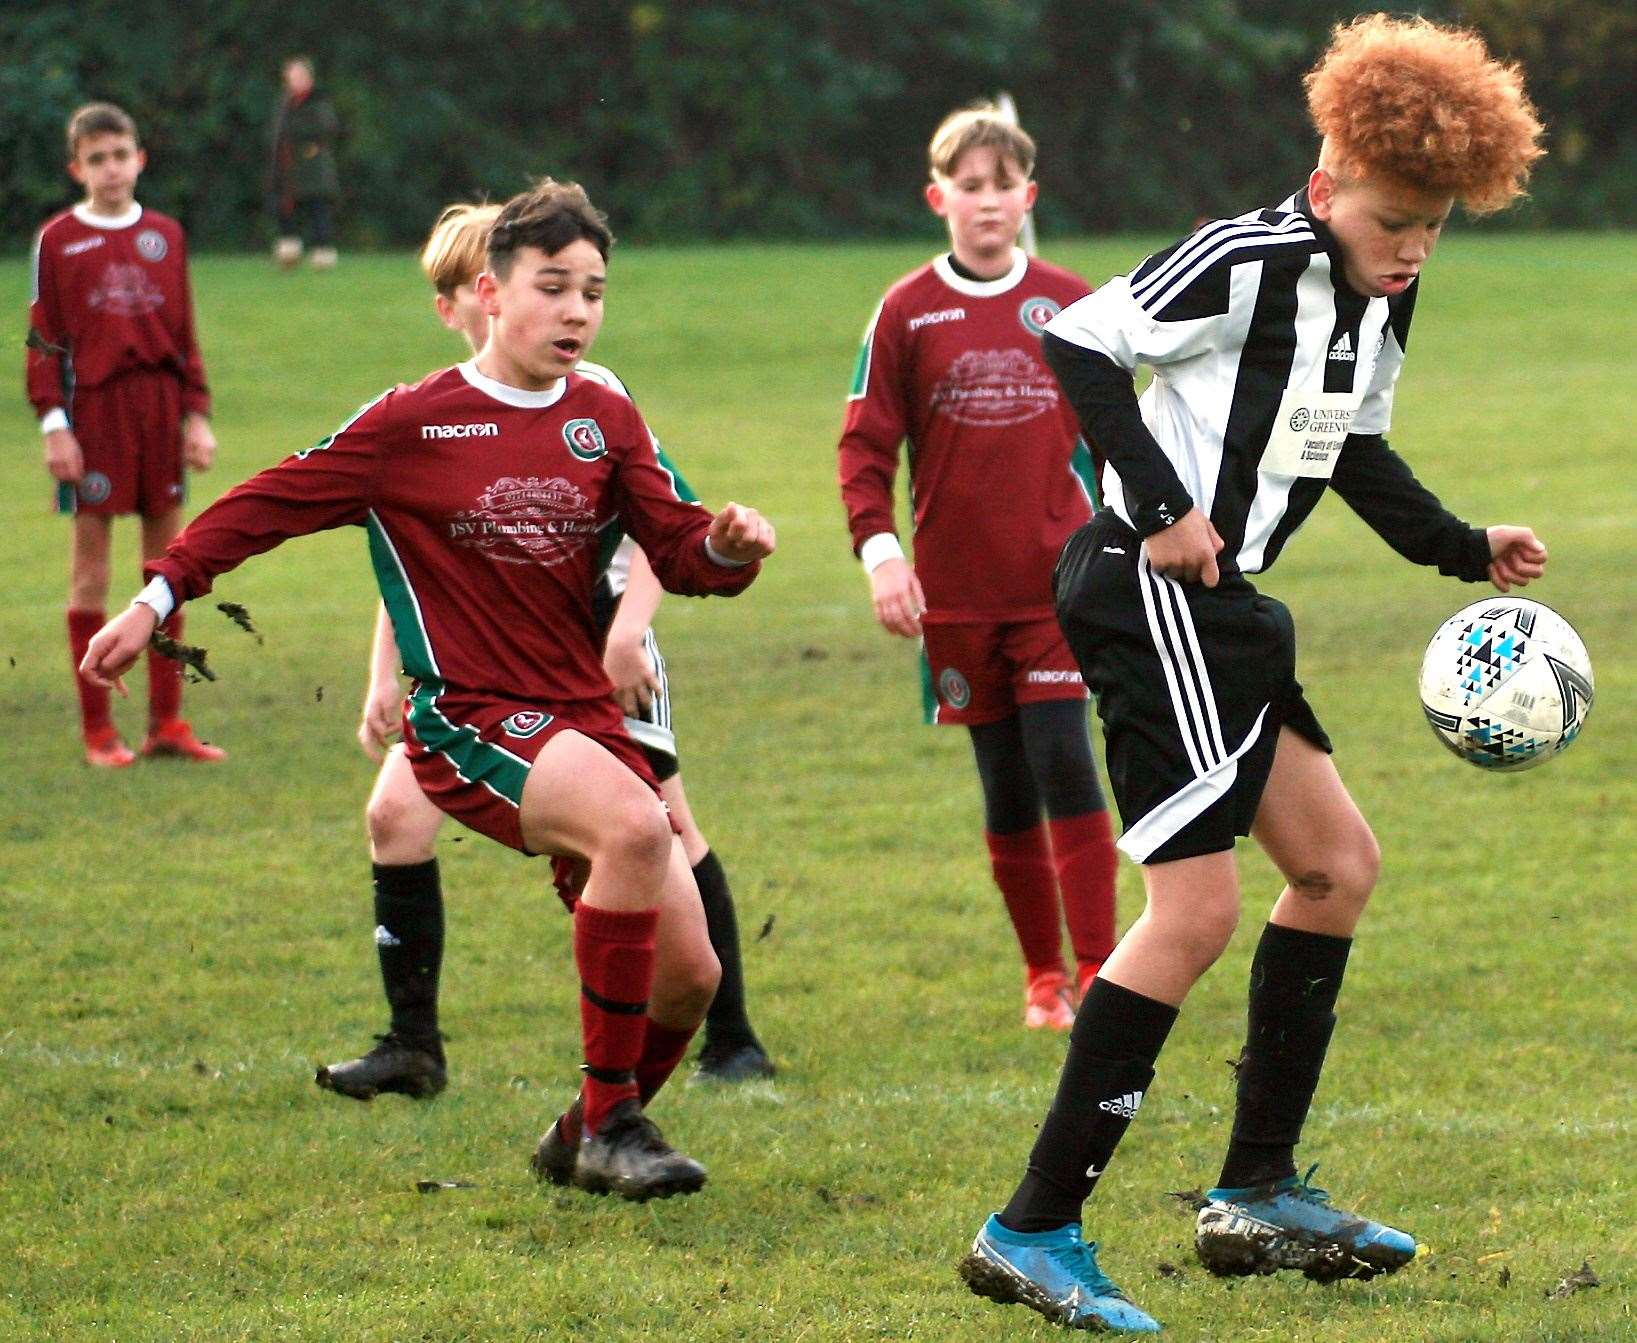 Real 60 under-14s in possession against Cobham Colts under-14s. Picture: Phil Lee FM22430390